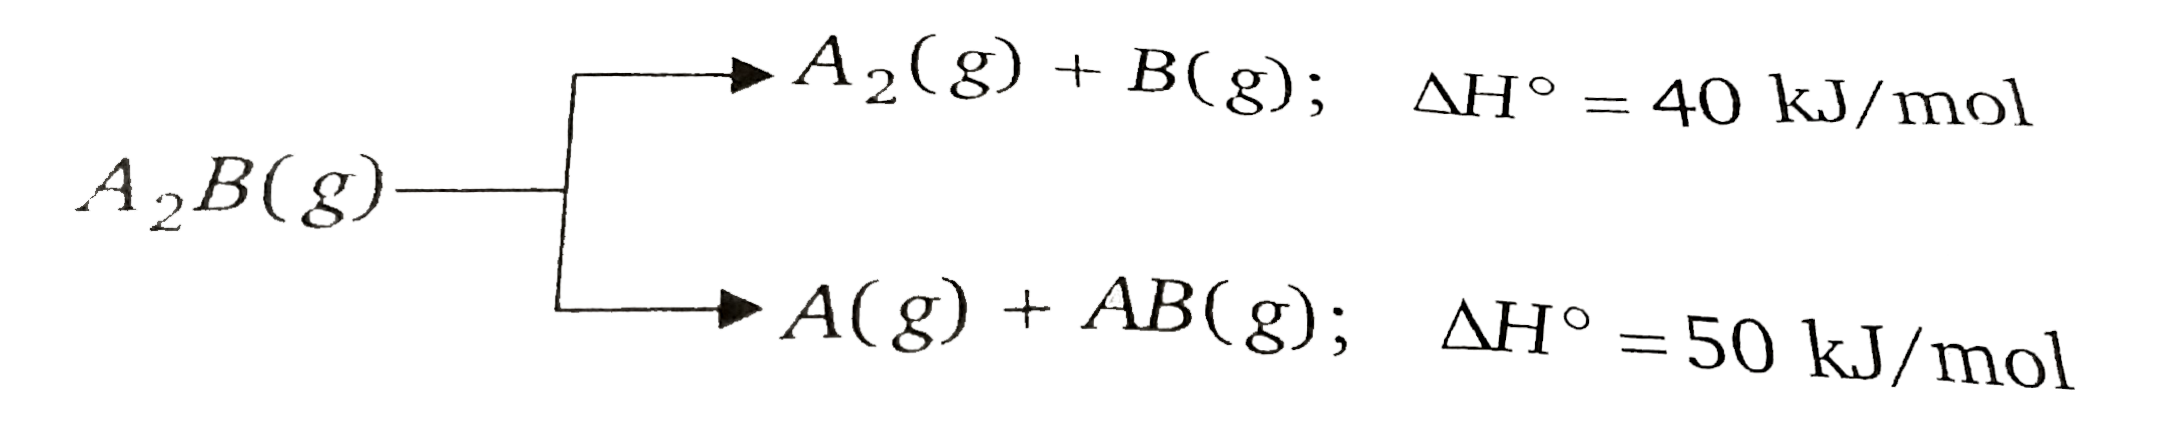 Substance A(2)B(g) can undergoes decomposition to form two set of products :          If the molar ratio of A(2)(g) to A(g) is 5 : 3 in a set of product gases, then the energy involved in the decomposition of 1 mole of A(2)B(g) is :